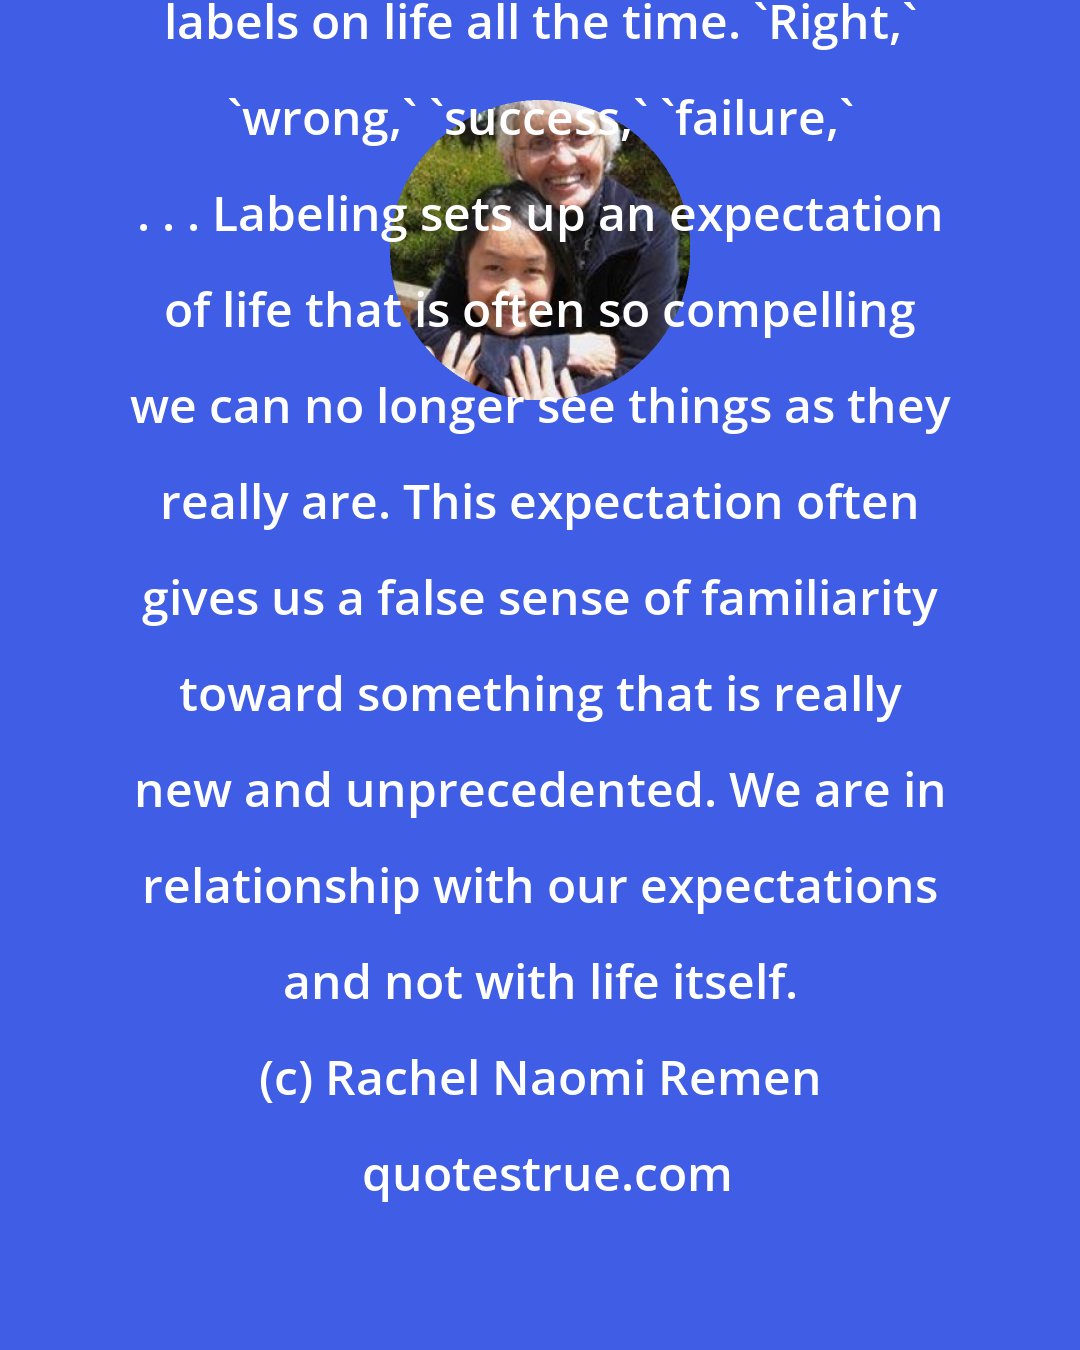 Rachel Naomi Remen: A label is a mask life wears. We put labels on life all the time. 'Right,' 'wrong,' 'success,' 'failure,' . . . Labeling sets up an expectation of life that is often so compelling we can no longer see things as they really are. This expectation often gives us a false sense of familiarity toward something that is really new and unprecedented. We are in relationship with our expectations and not with life itself.